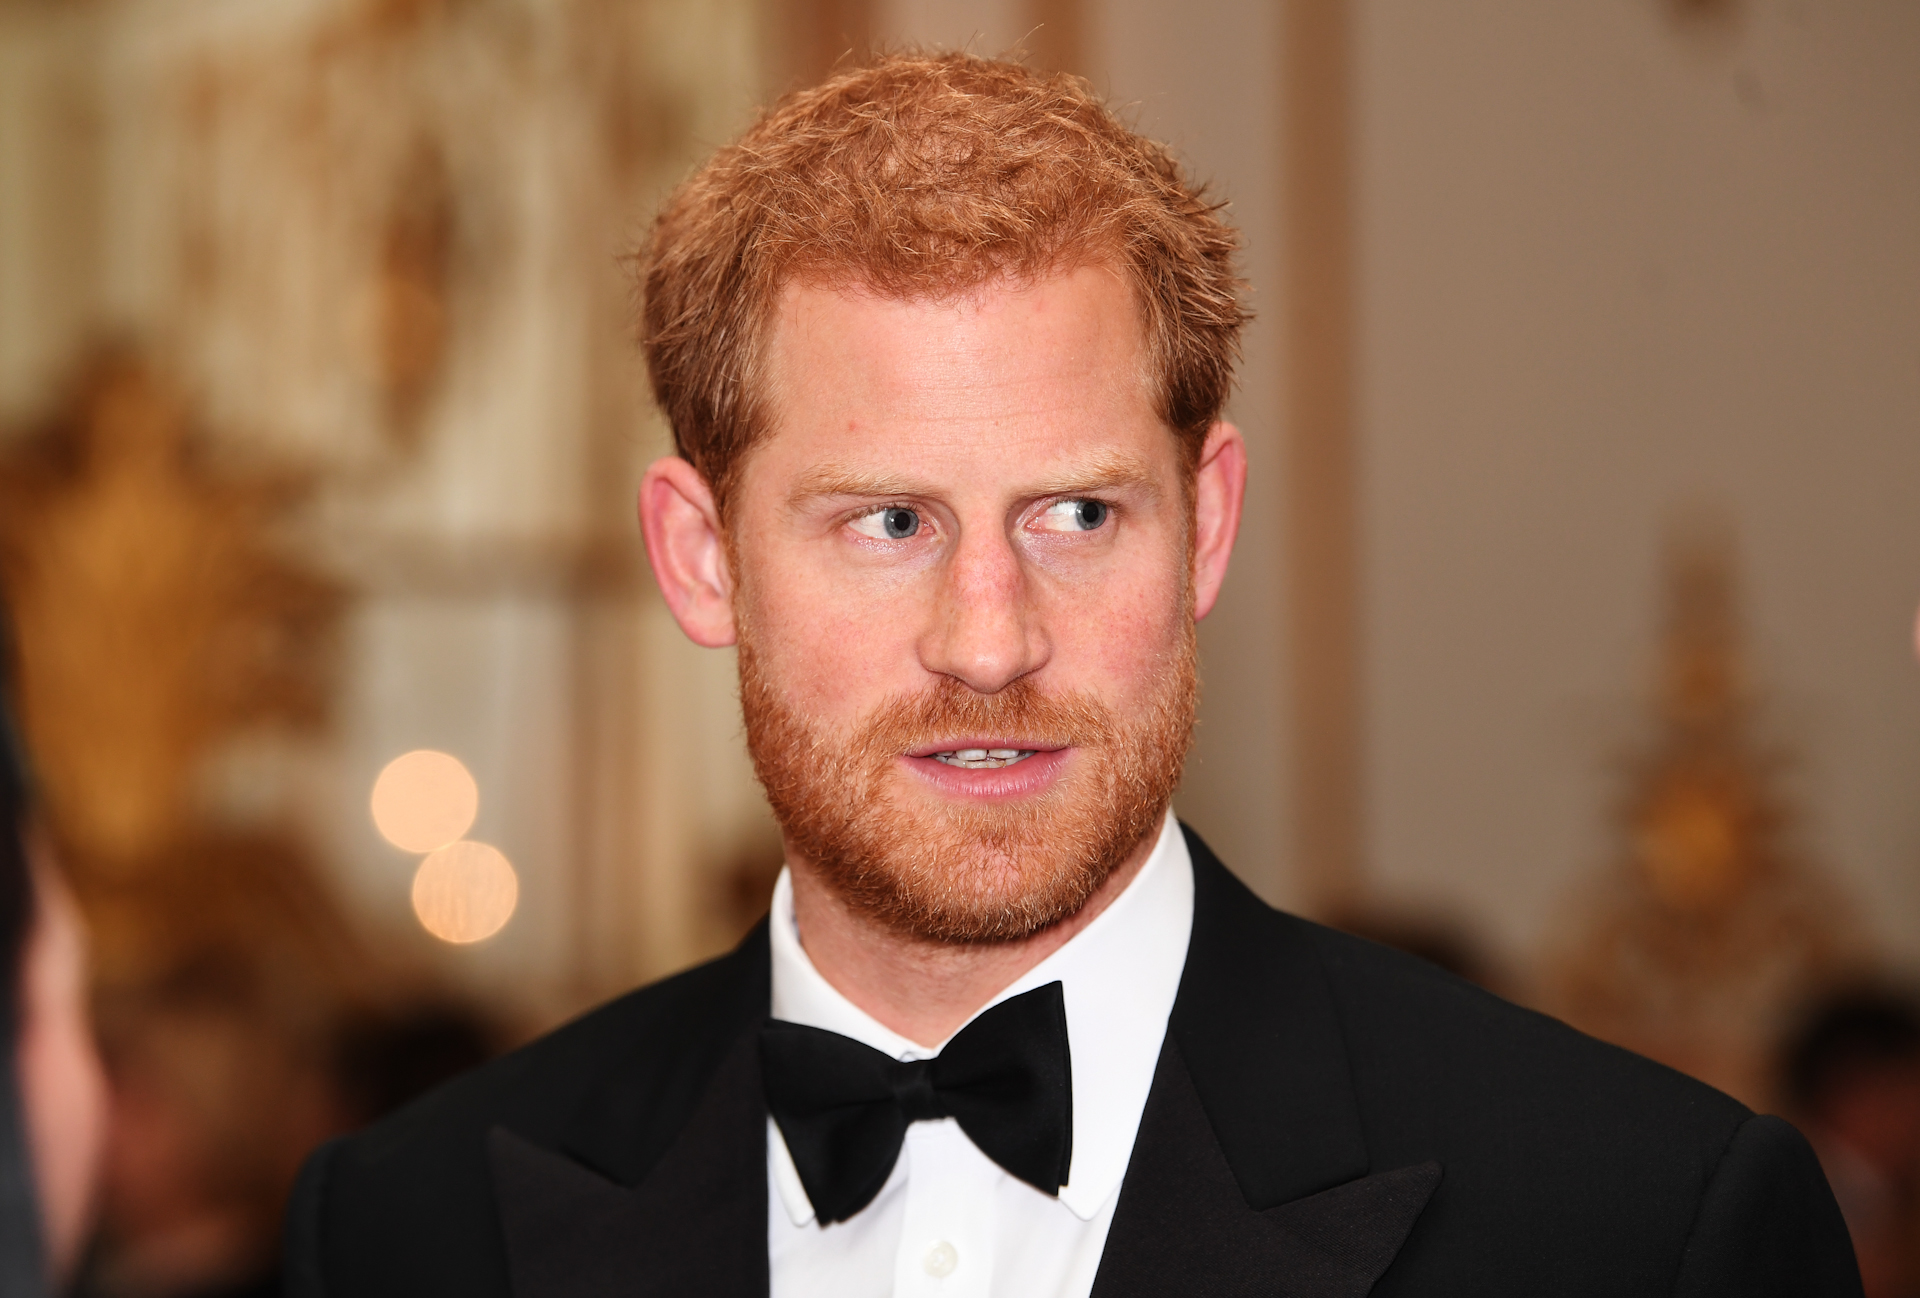 Prince Harry: 'that's why I'm so resilient'